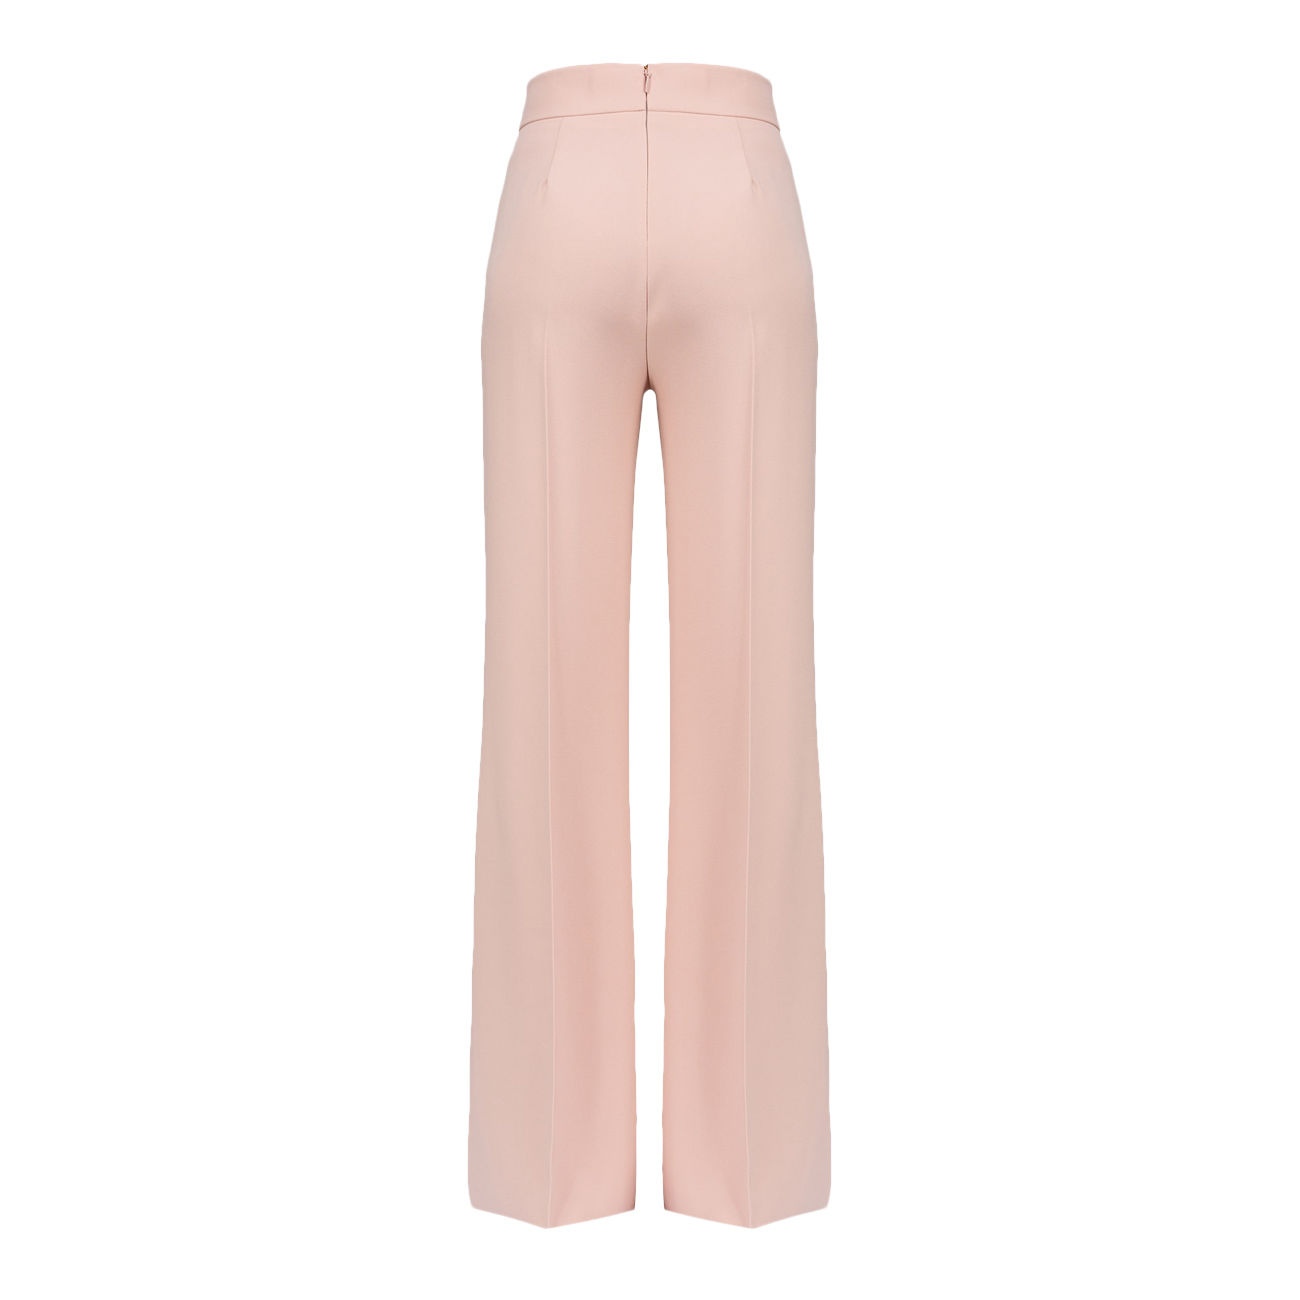 Anklelength trousers  Pink  Ladies  HM IN